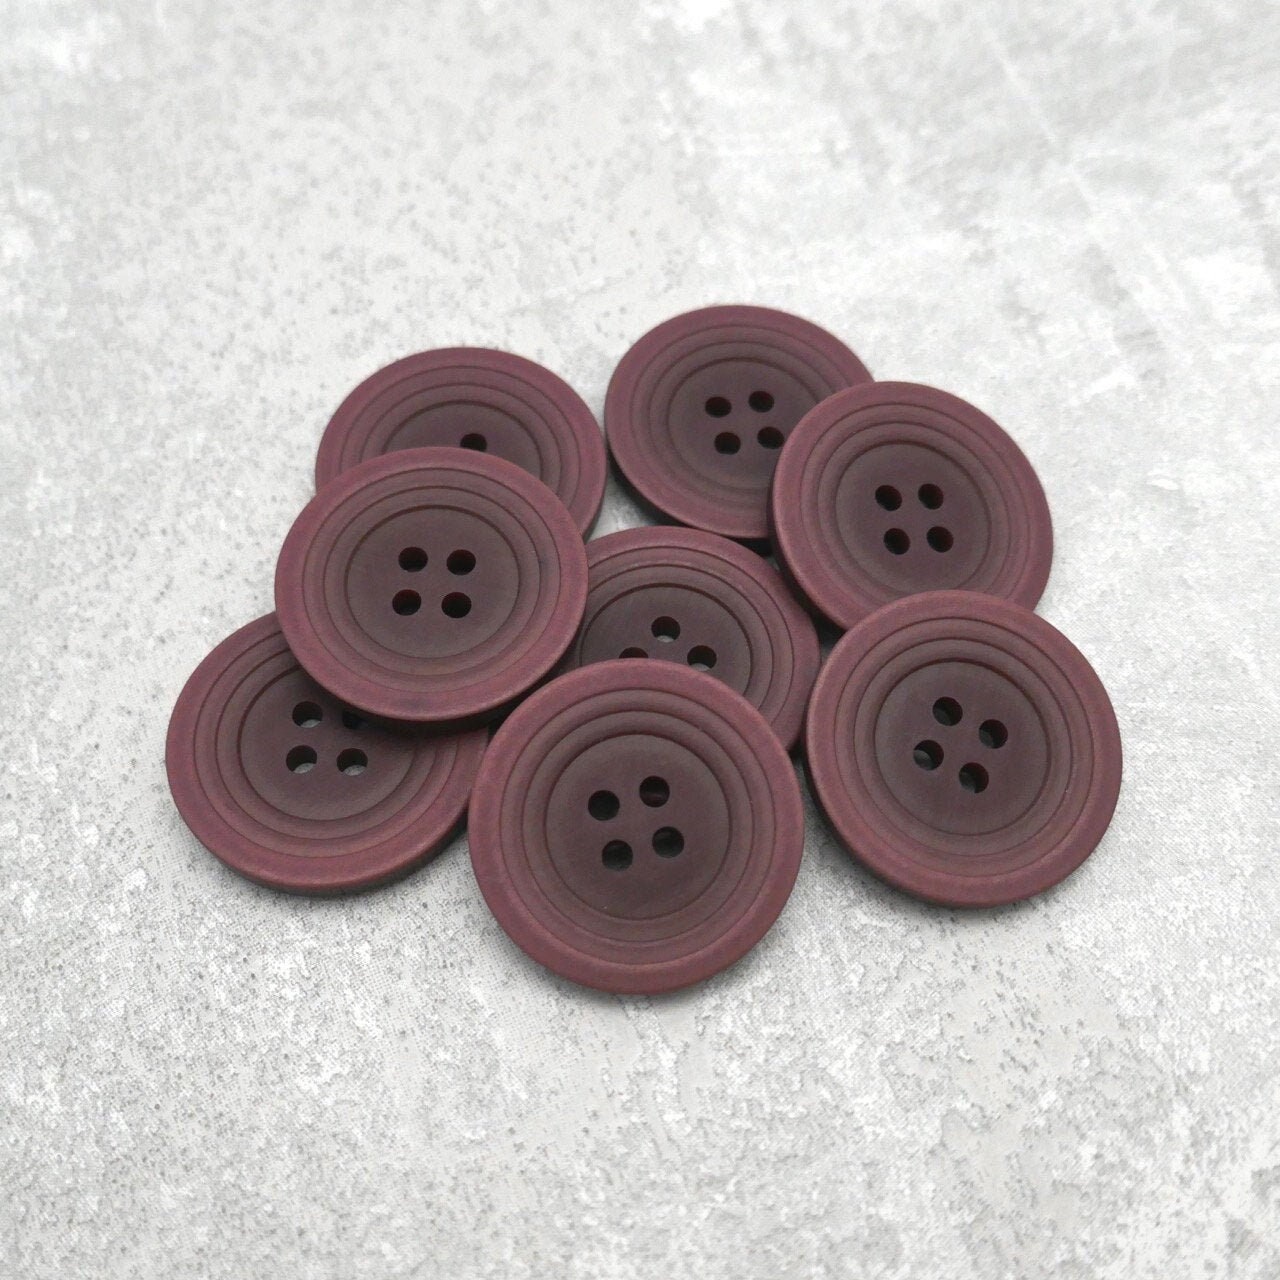  Xucus 10pcs/lot High-end Color red Circular Resin Buttons Joker  Cashmere Mink Coat dust Coat Buttons for Women 21mm-30mm - (Color: Red,  Size: 38mm)